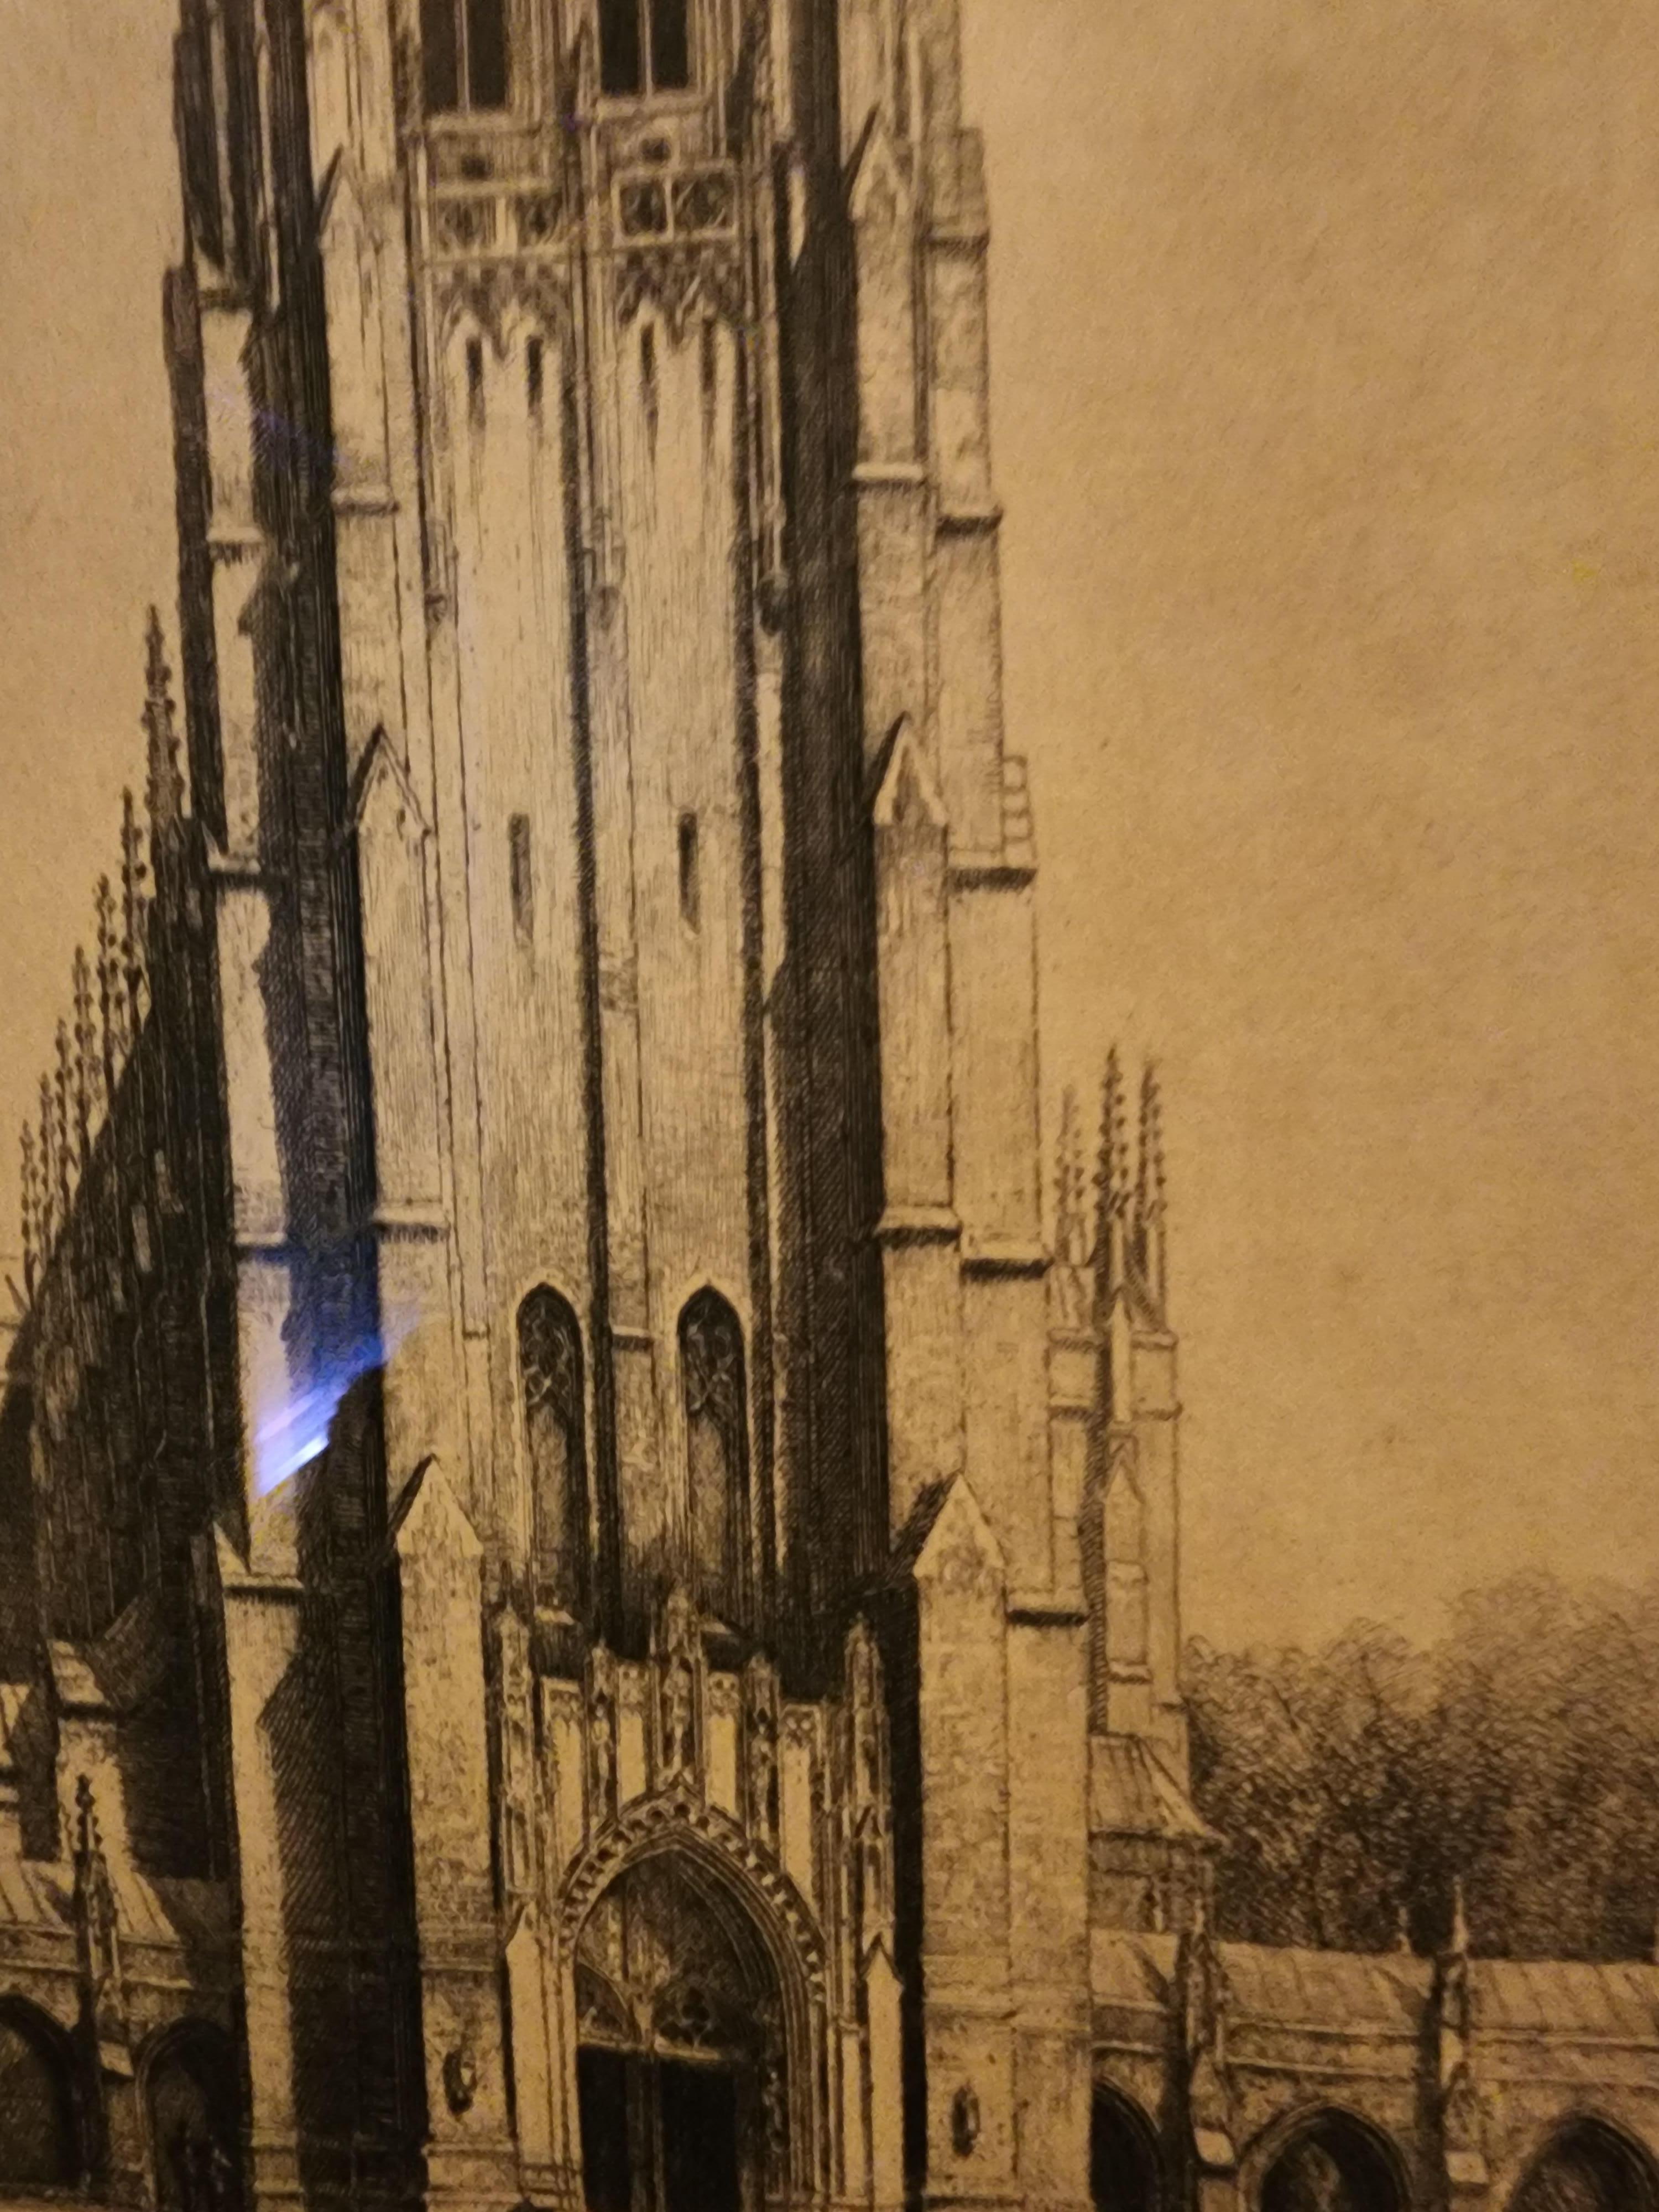 RGRFineArts is pleased to offer the etching The Duke Chapel from the Centennial Edition  of 100 prints.
Excellent condition and nicely framed with Tru Vue ultraviolet filtering glass.
